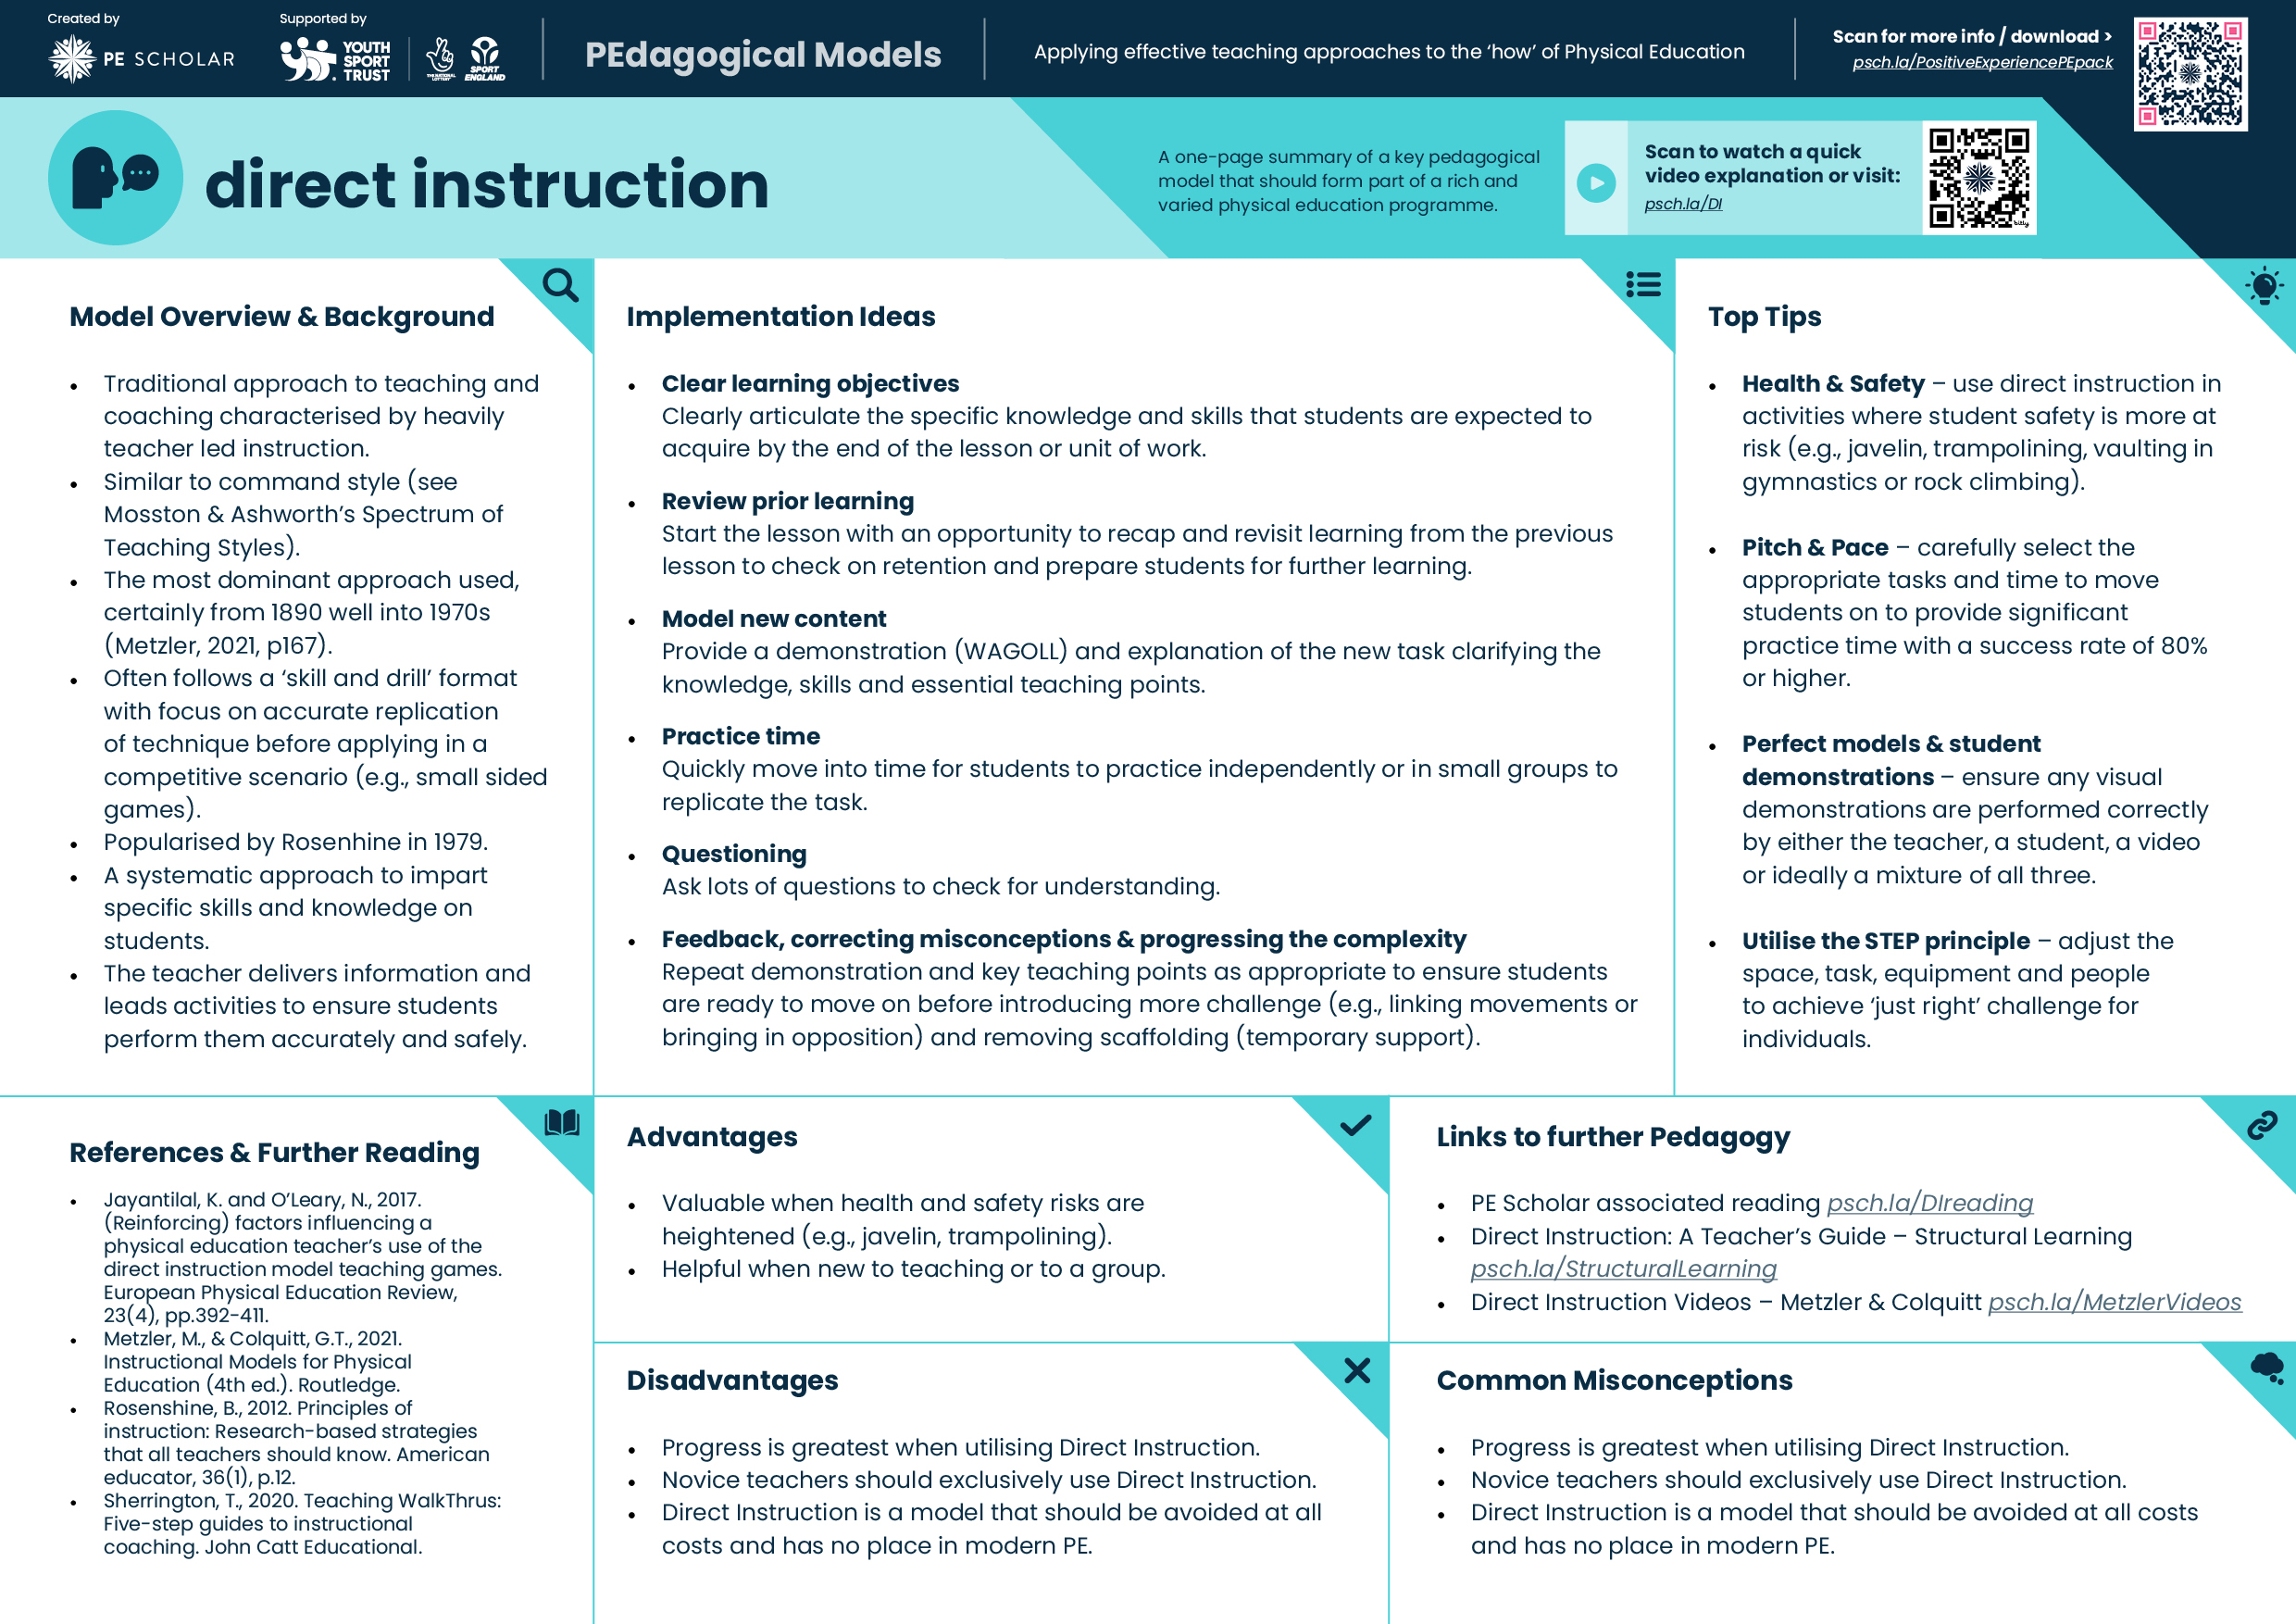 One-page summary of the direct instruction method 